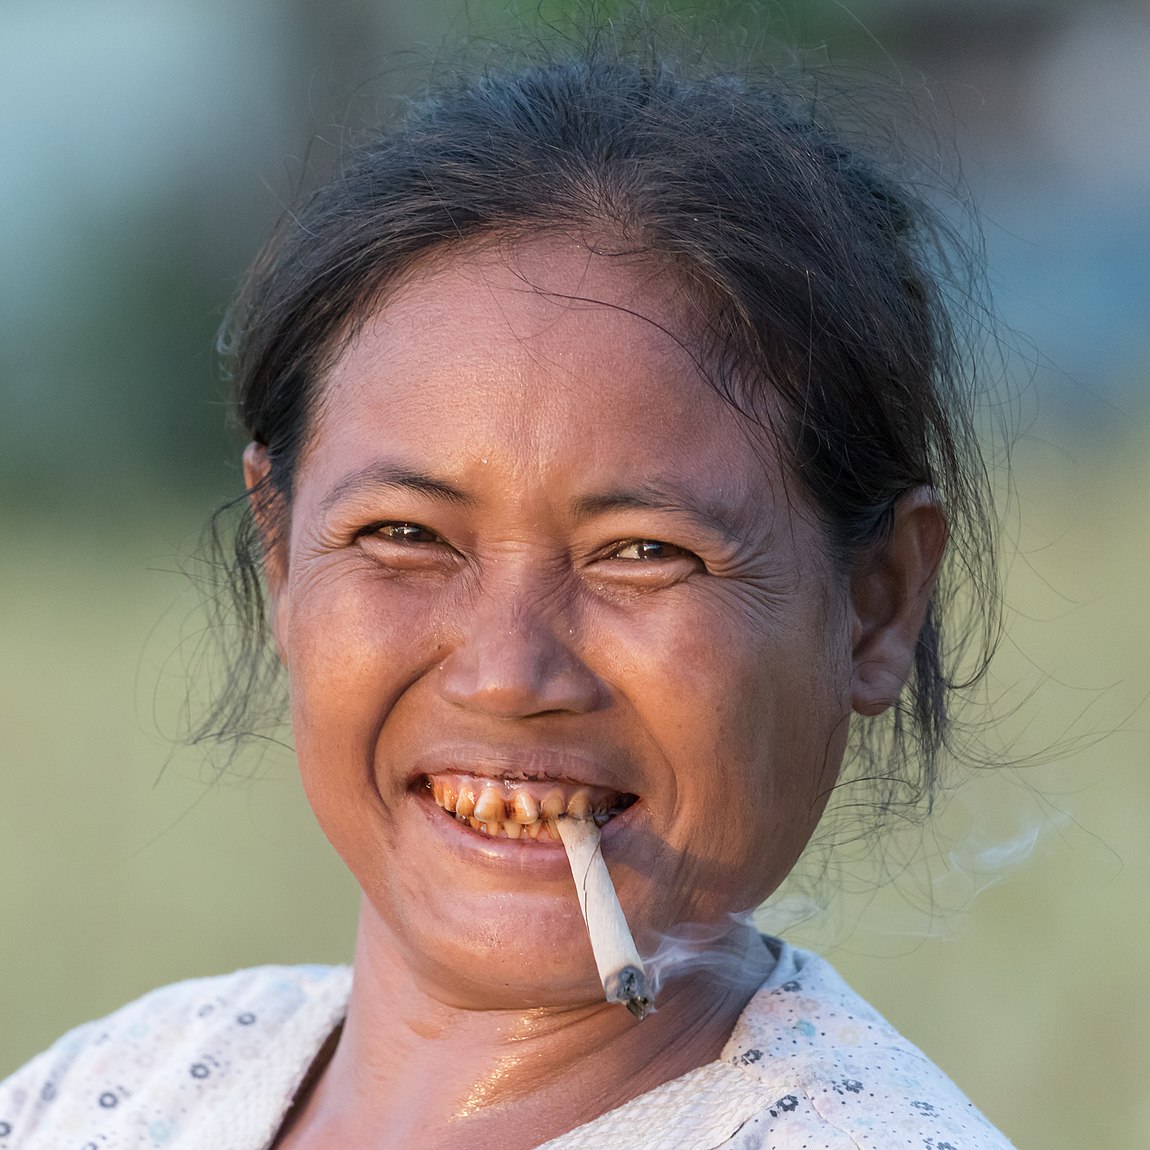 Portrait of a woman smoking a hand-rolled cigarette chewing paan